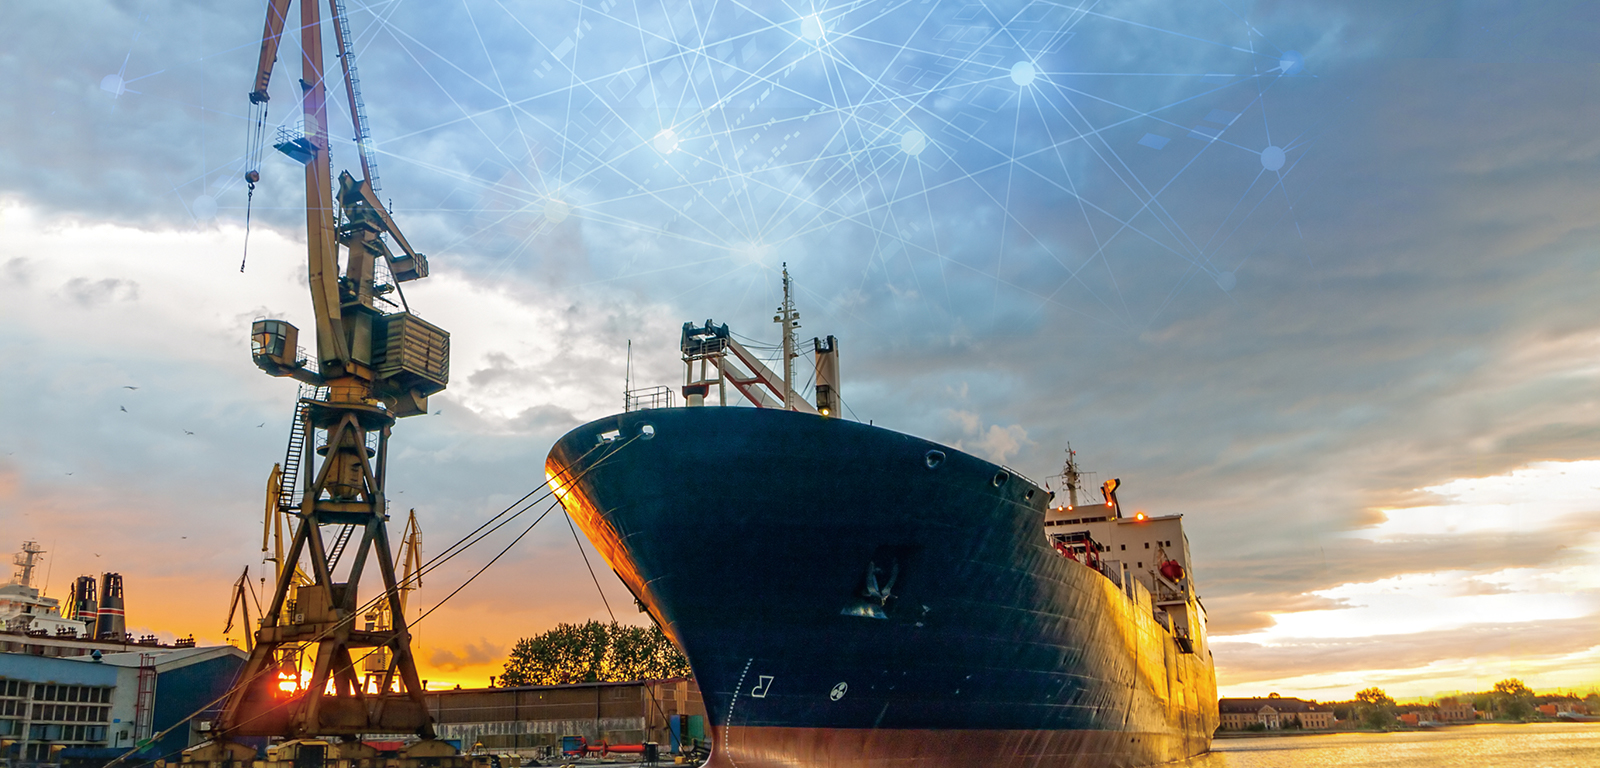 Industry-leading High Accuracy. Reliable measurements for safe cargo operations.